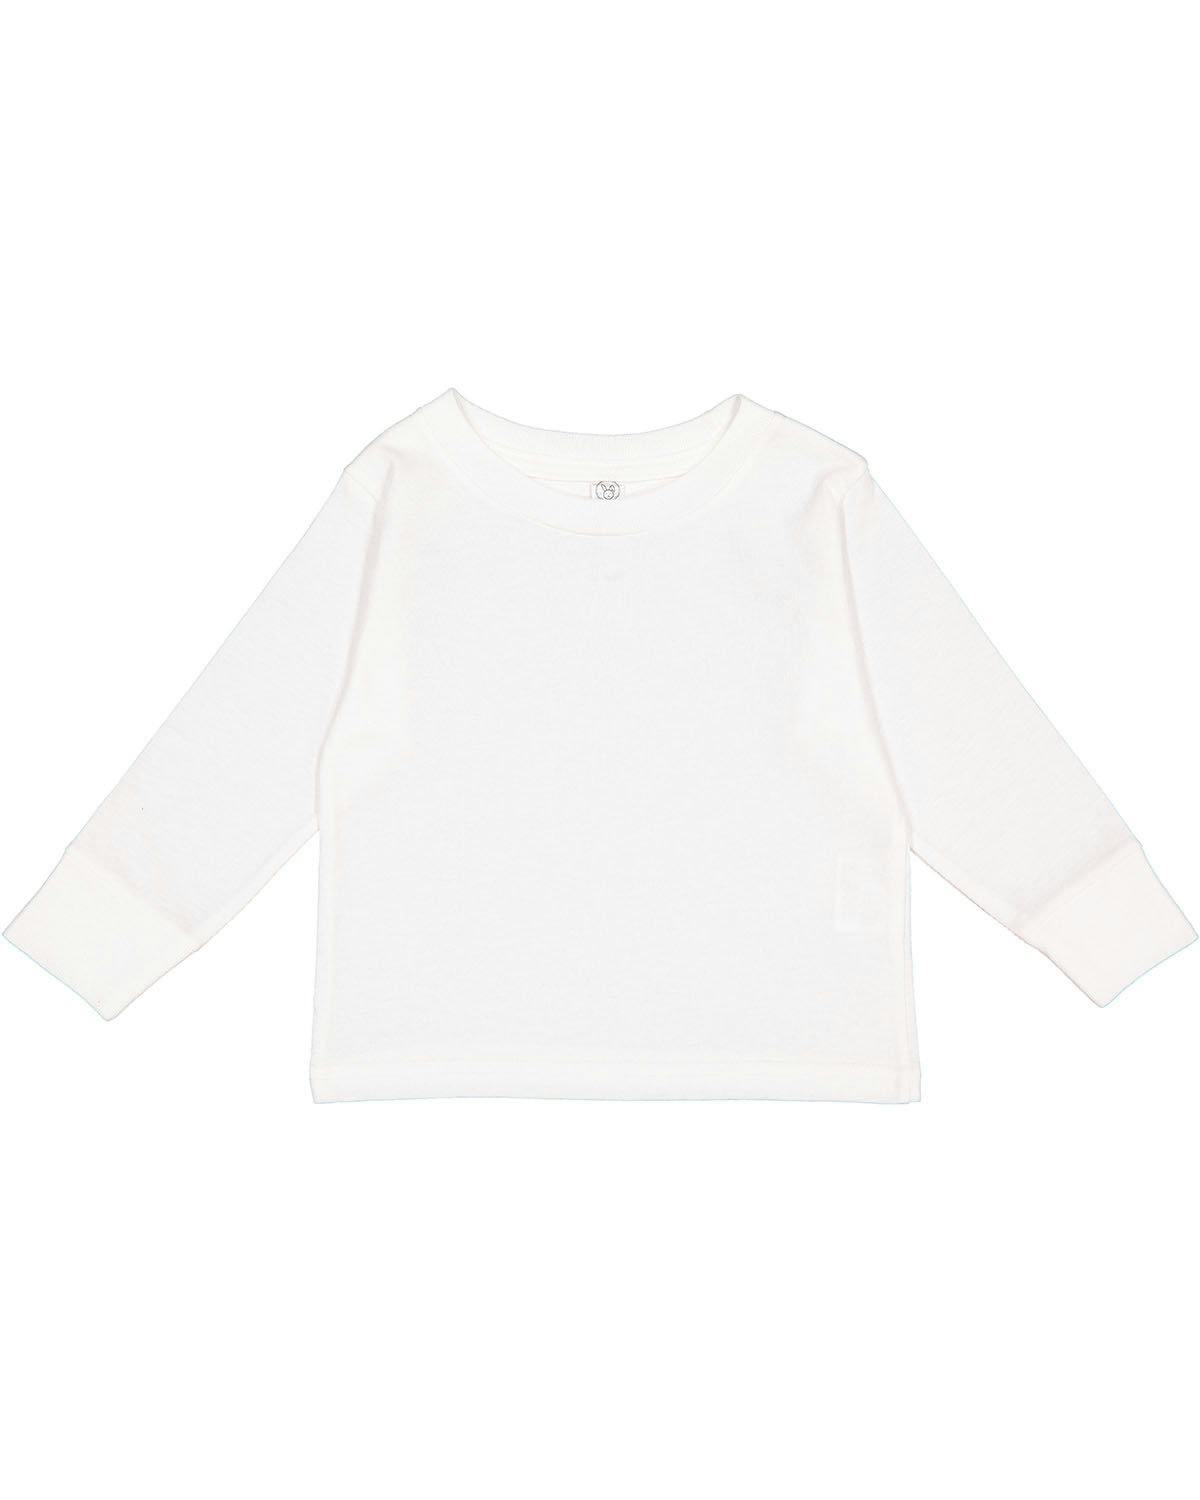 Image for Toddler Long-Sleeve T-Shirt